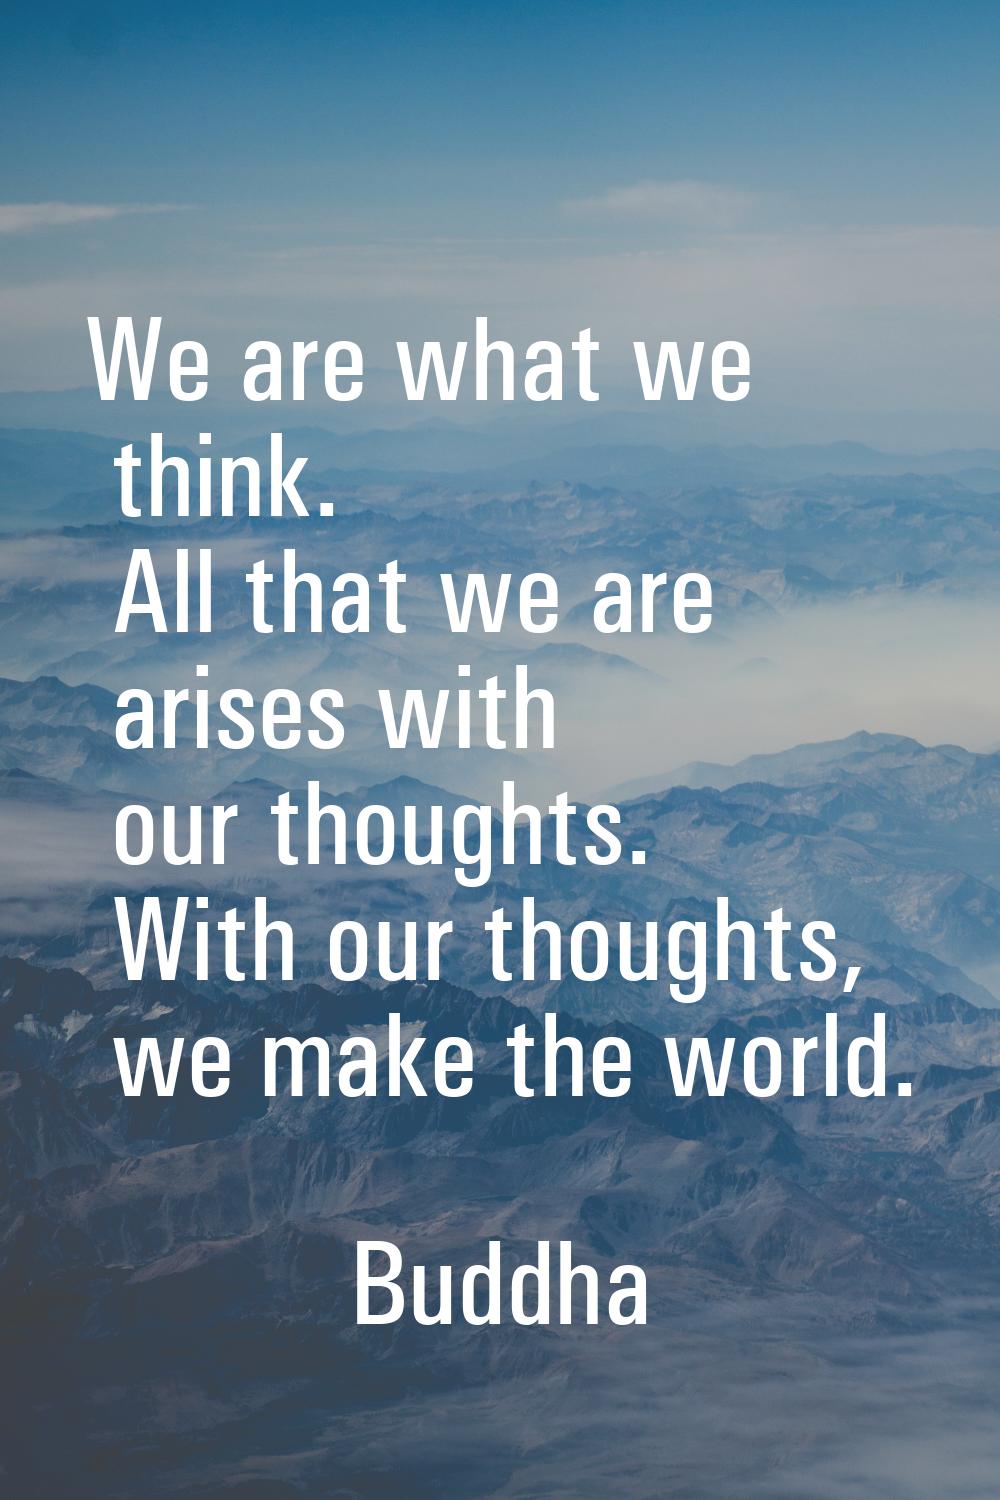 We are what we think. All that we are arises with our thoughts. With our thoughts, we make the worl